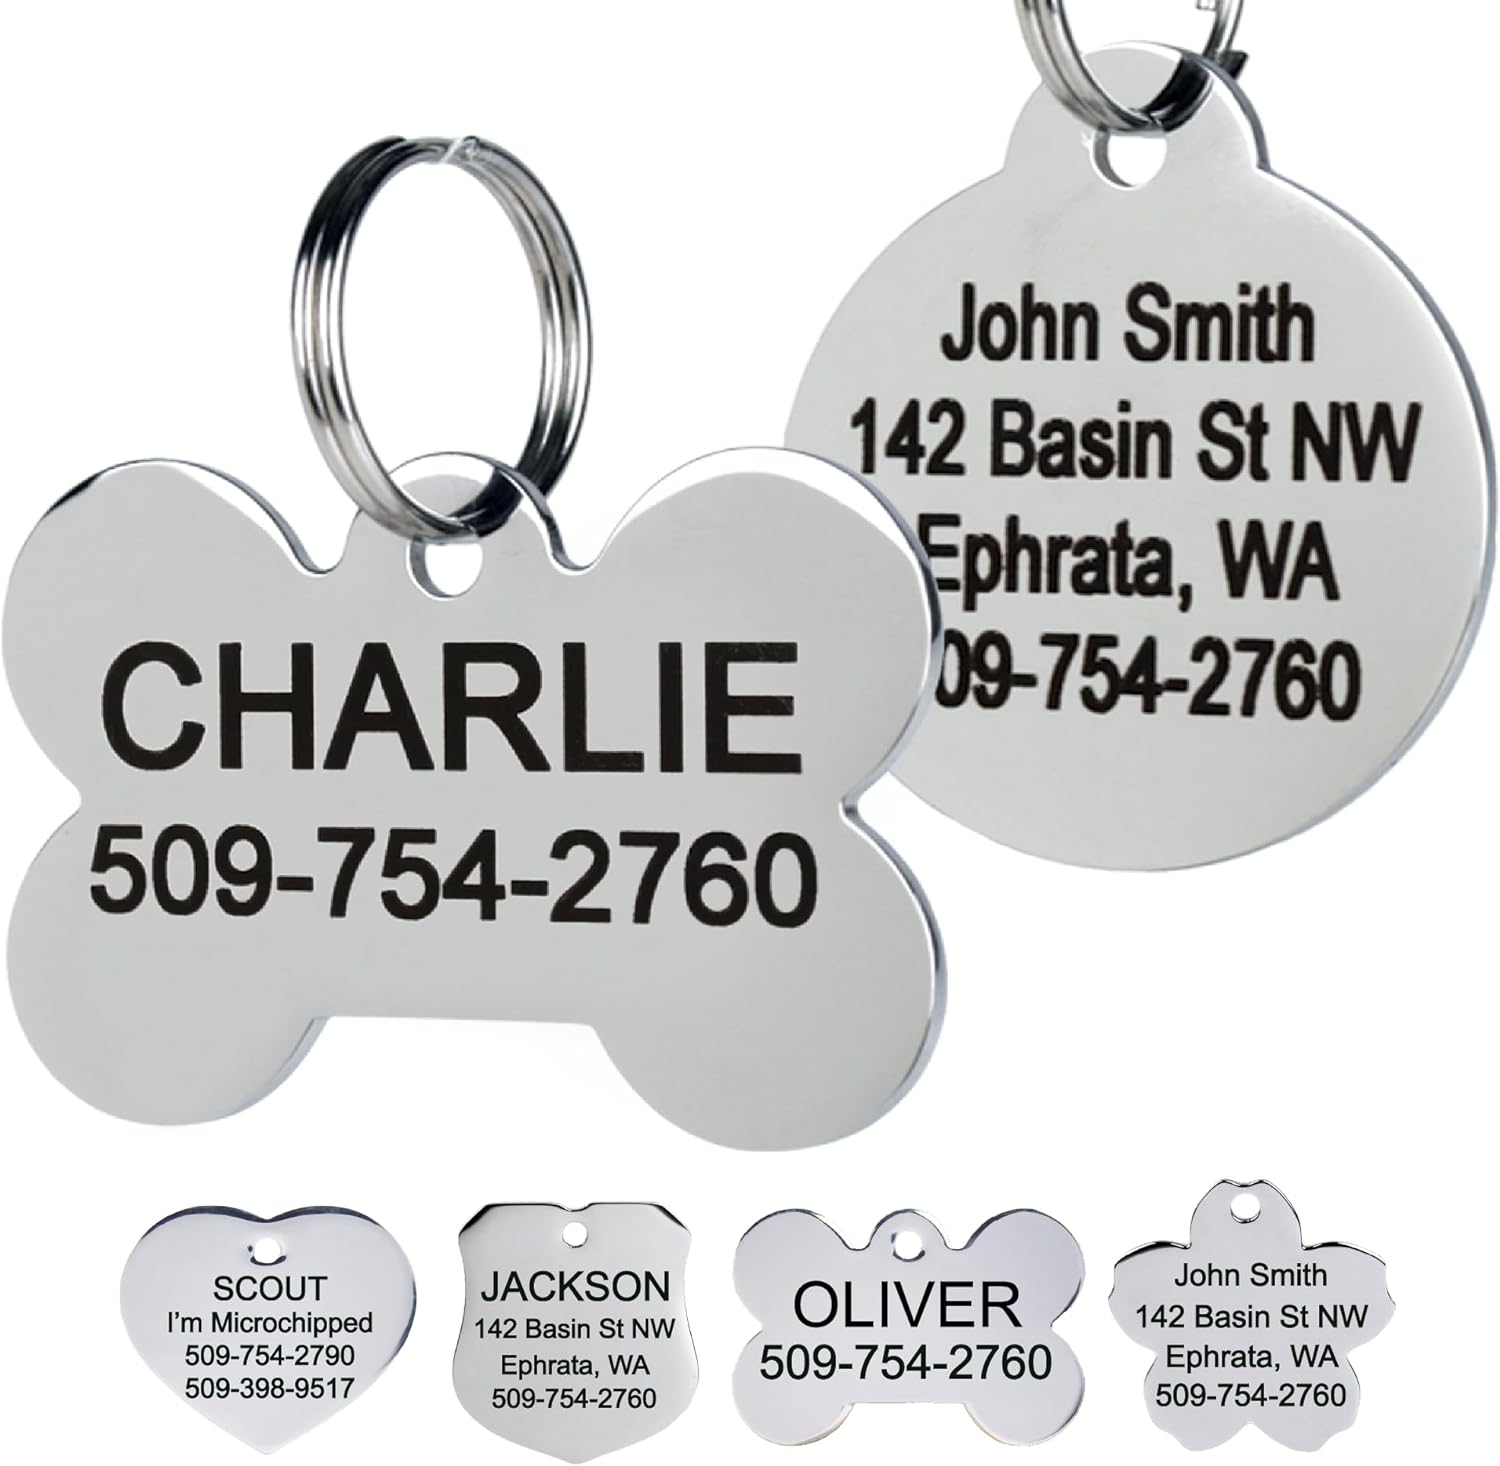 Customizable name tags - Personalize your black pointer dog's identification with a unique and customizable name tag.
Grooming accessories - Discover a wide range of grooming tools and products to keep your black pointer dog looking their best.